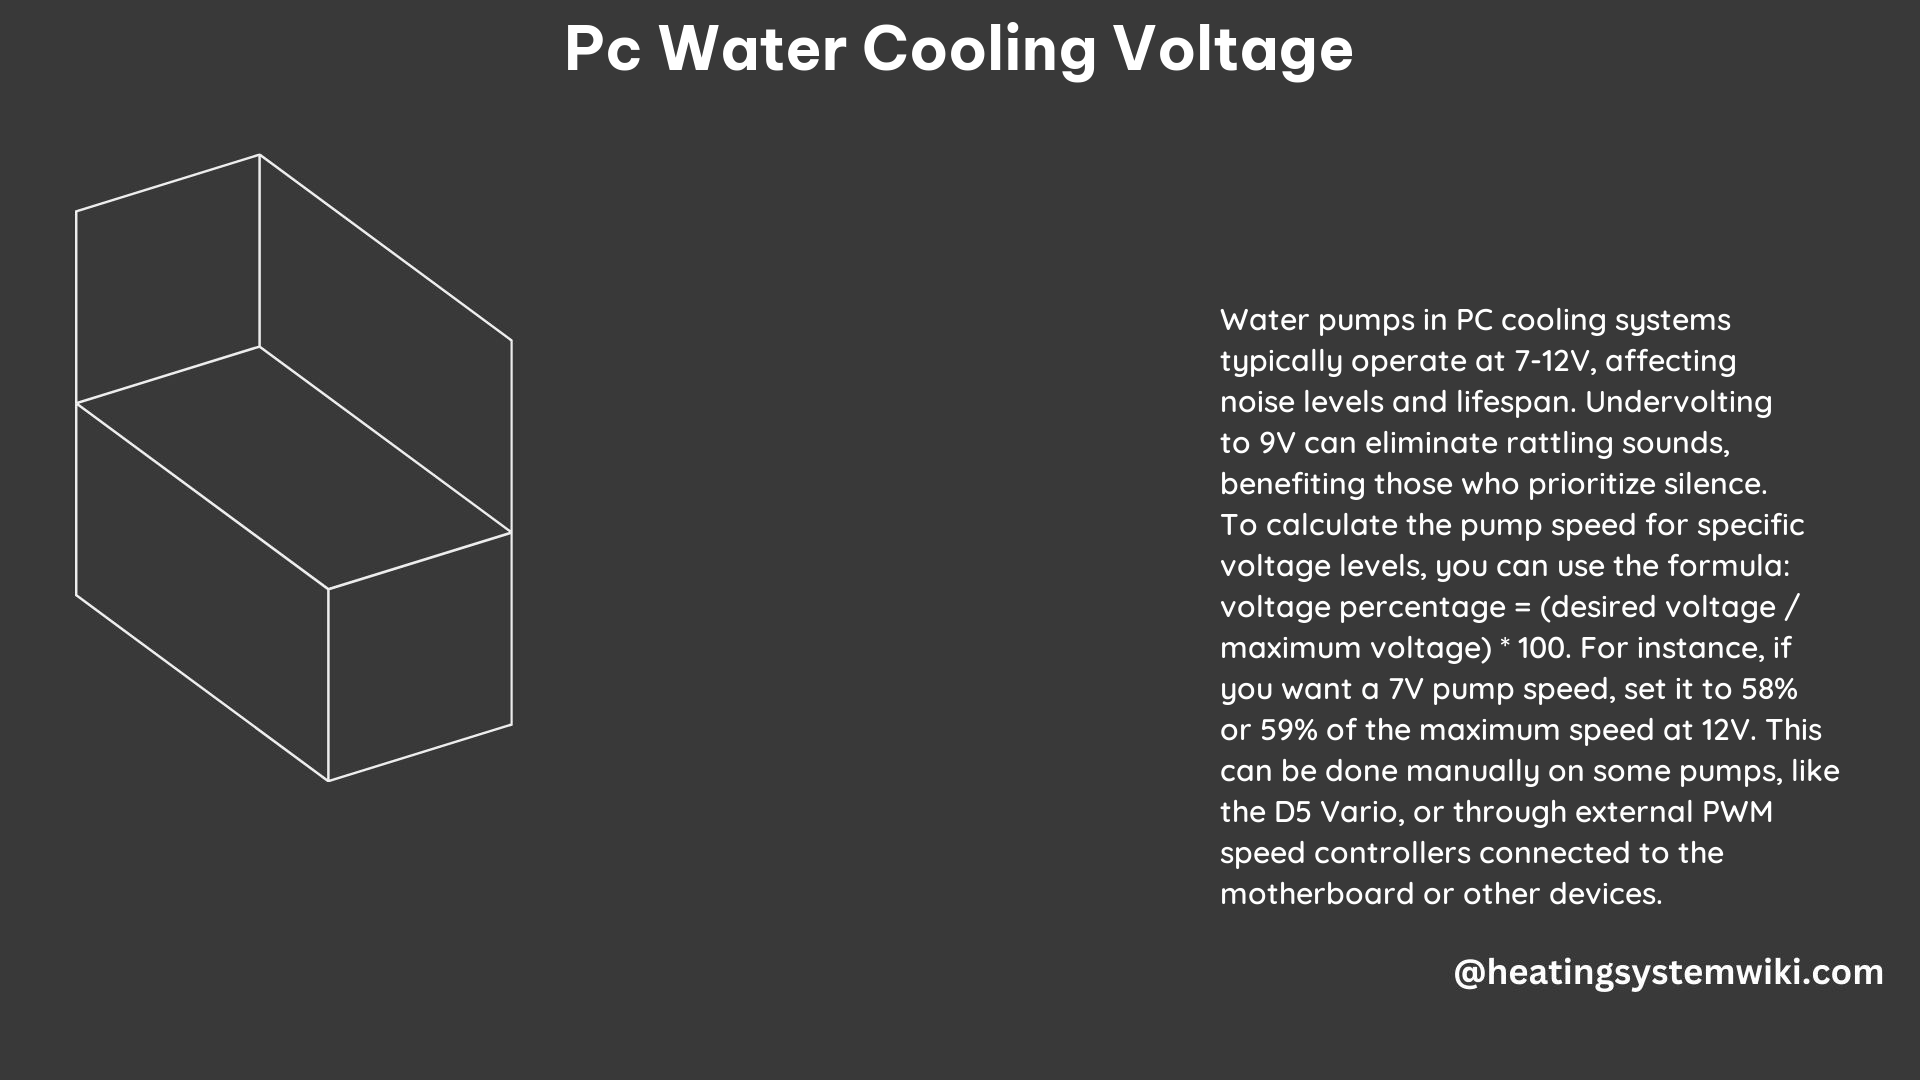 PC Water Cooling Voltage